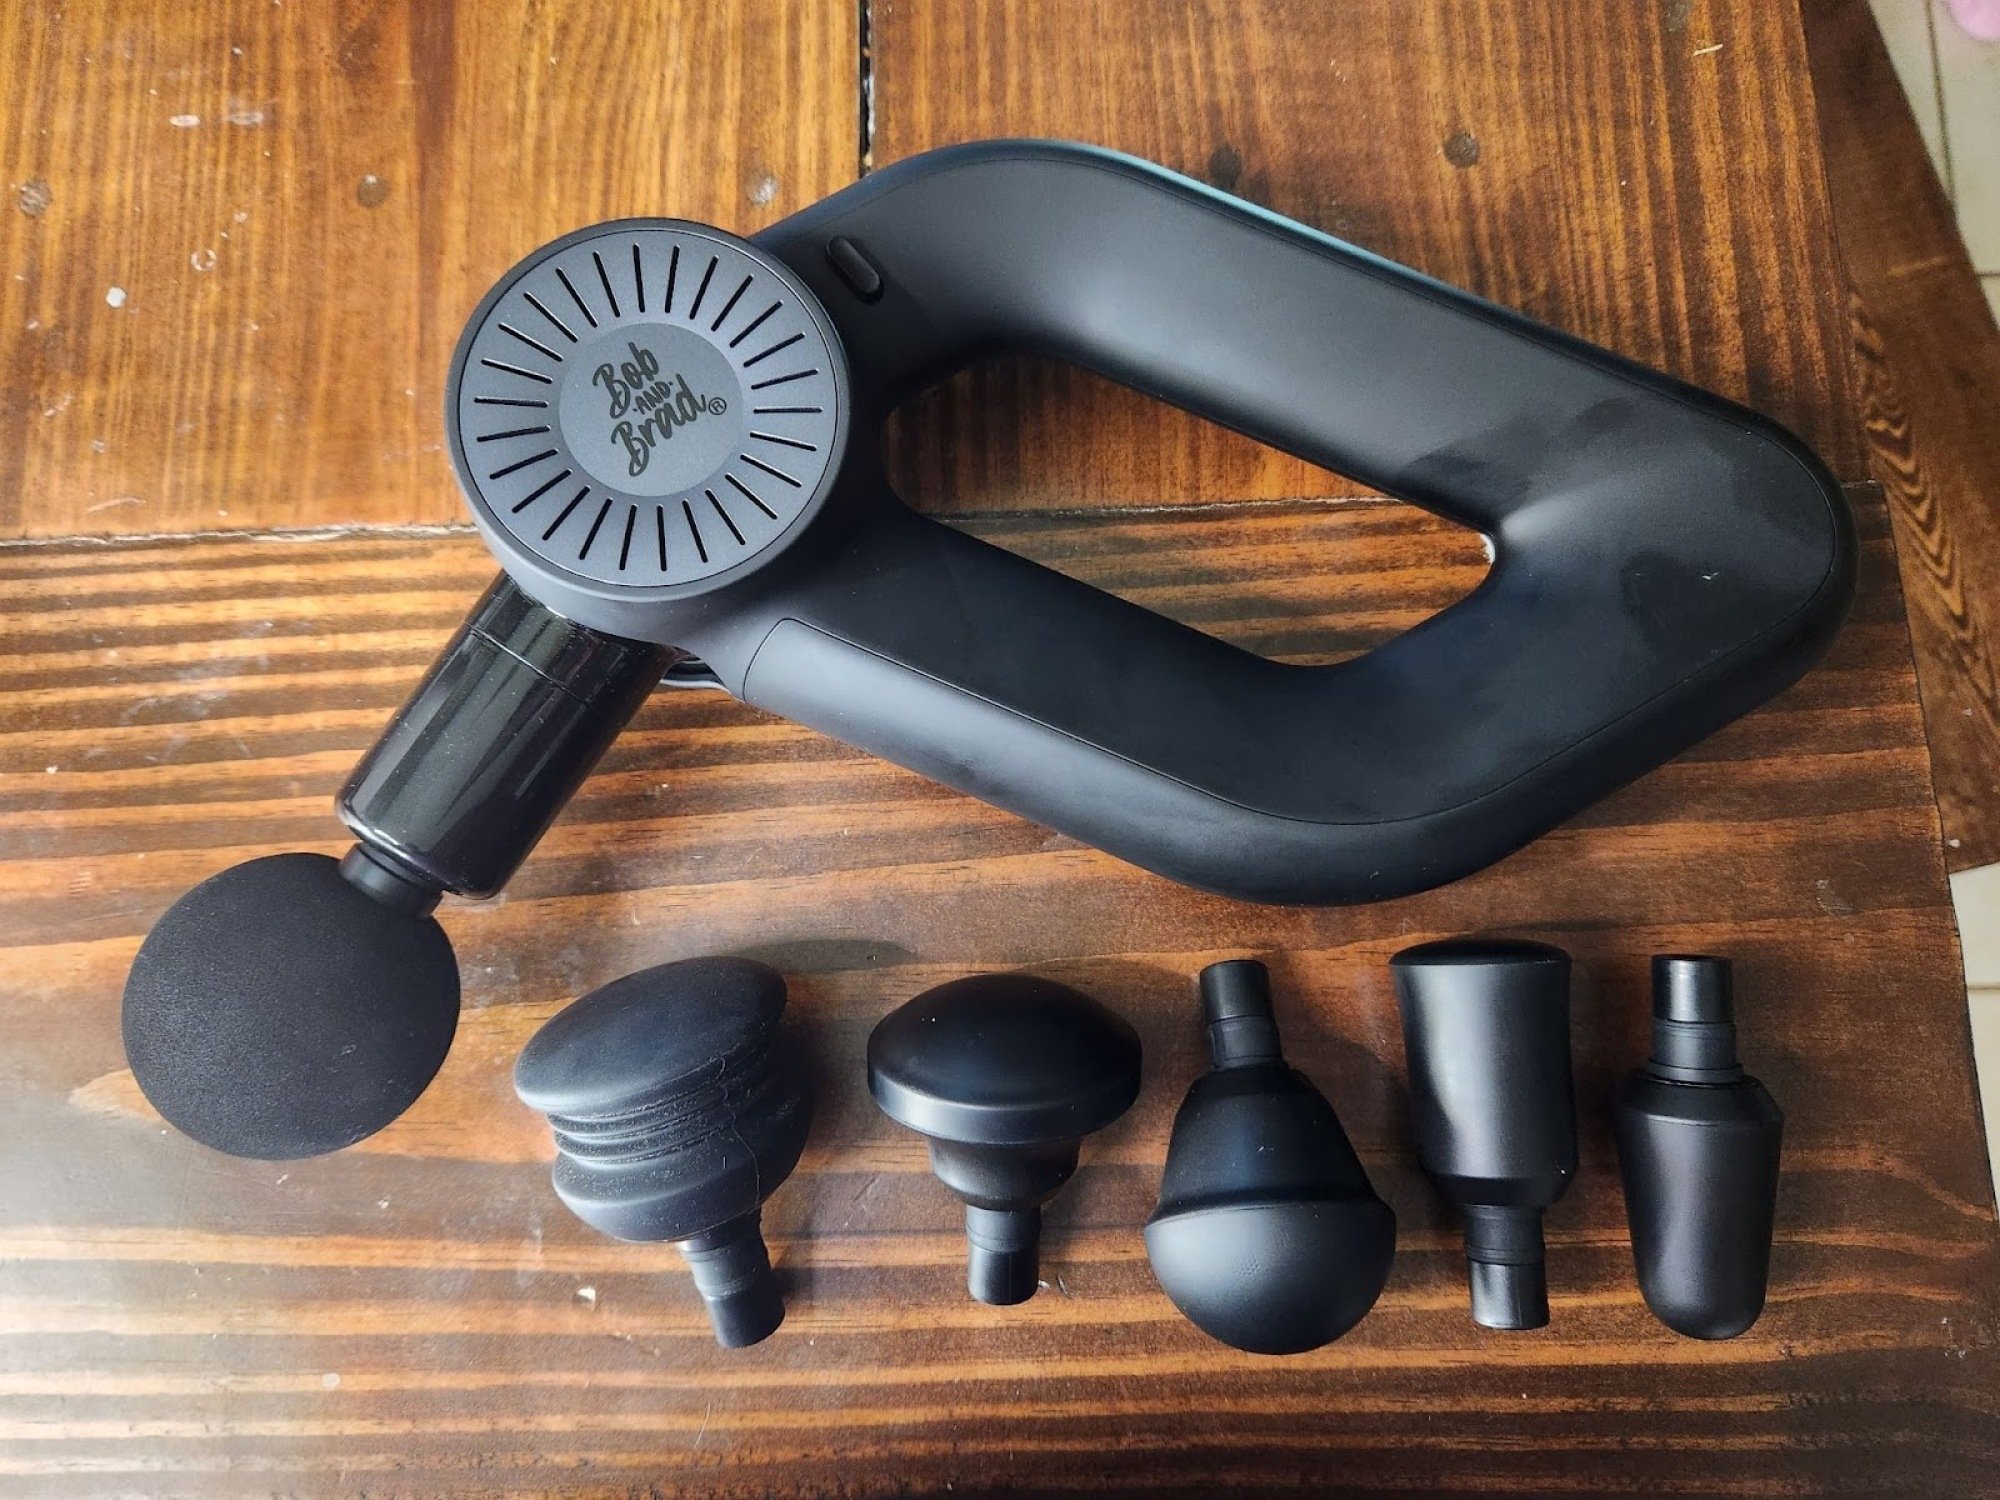 massage gun laid out on tablet with six interchangeable attachments